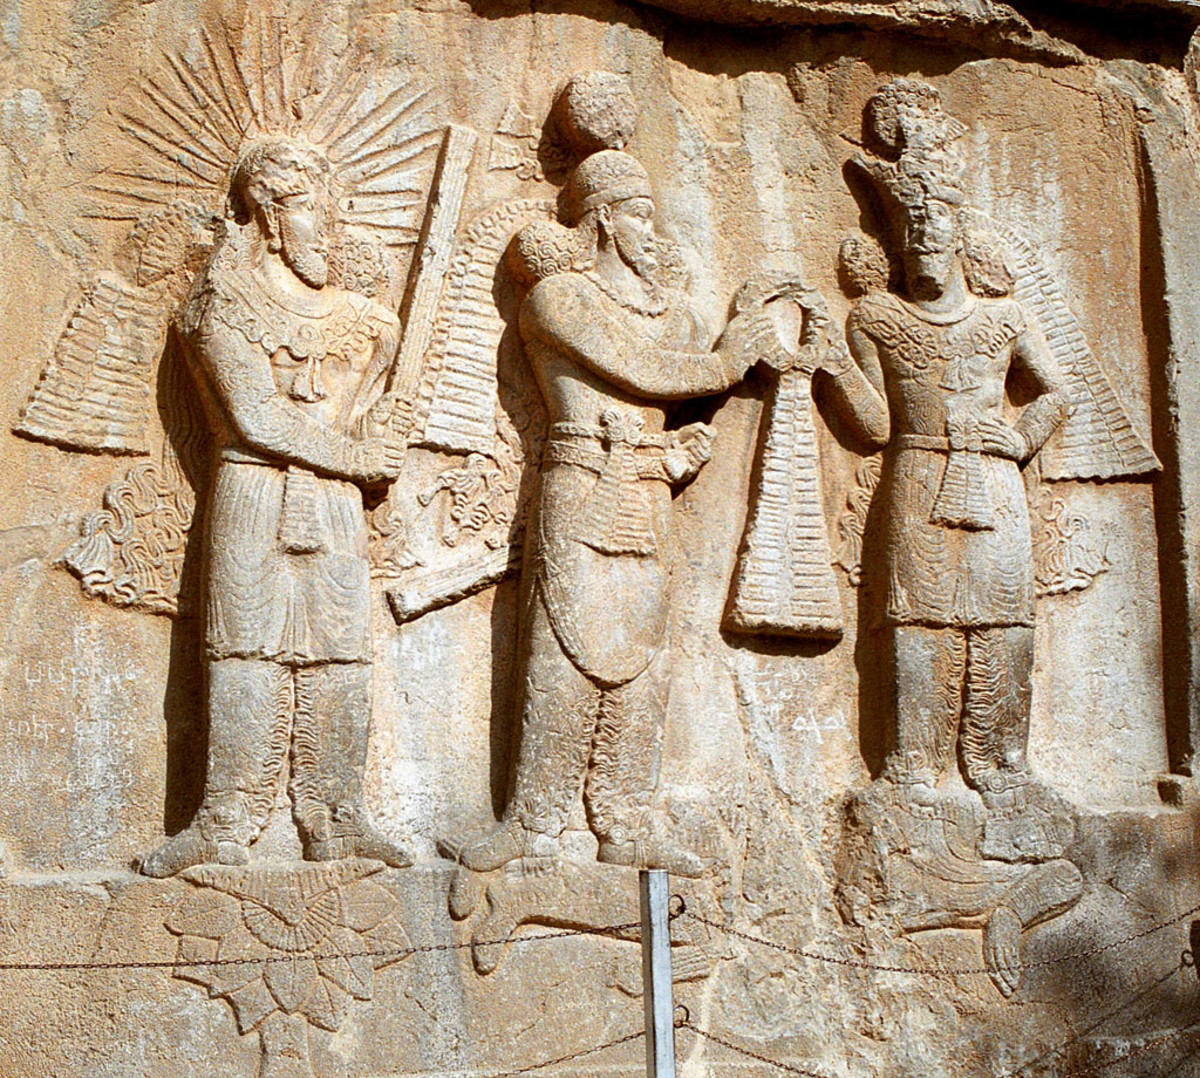 Mithra consecrating the investiture of Sassanid emperor Ardashir II. The god is standing at the leftmost.